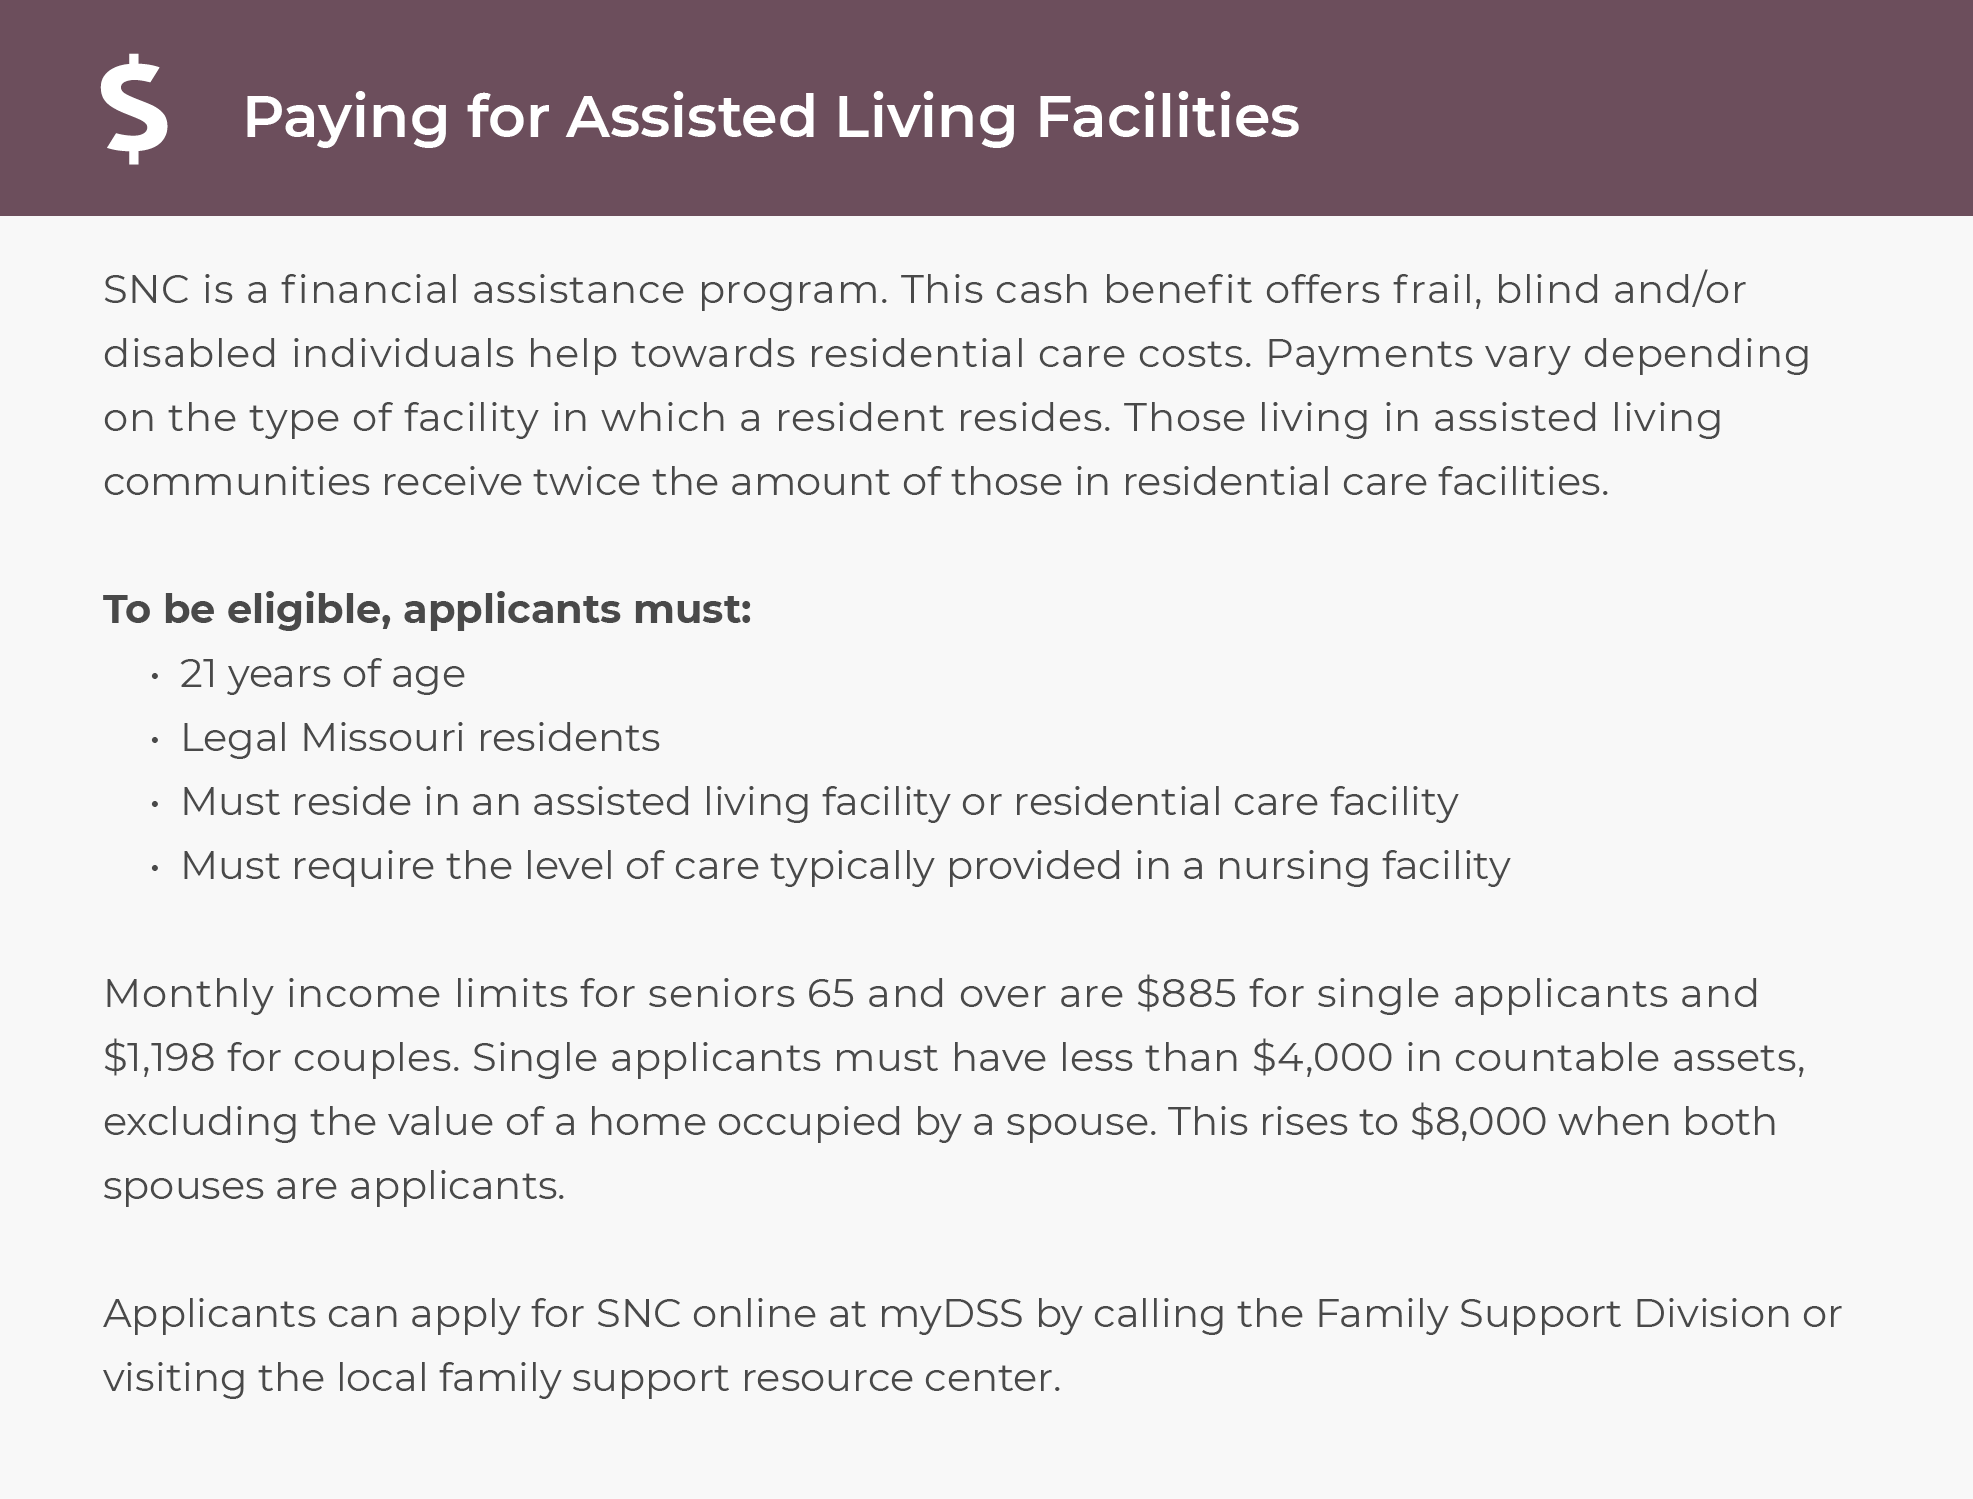 Paying for assisted living in Missouri